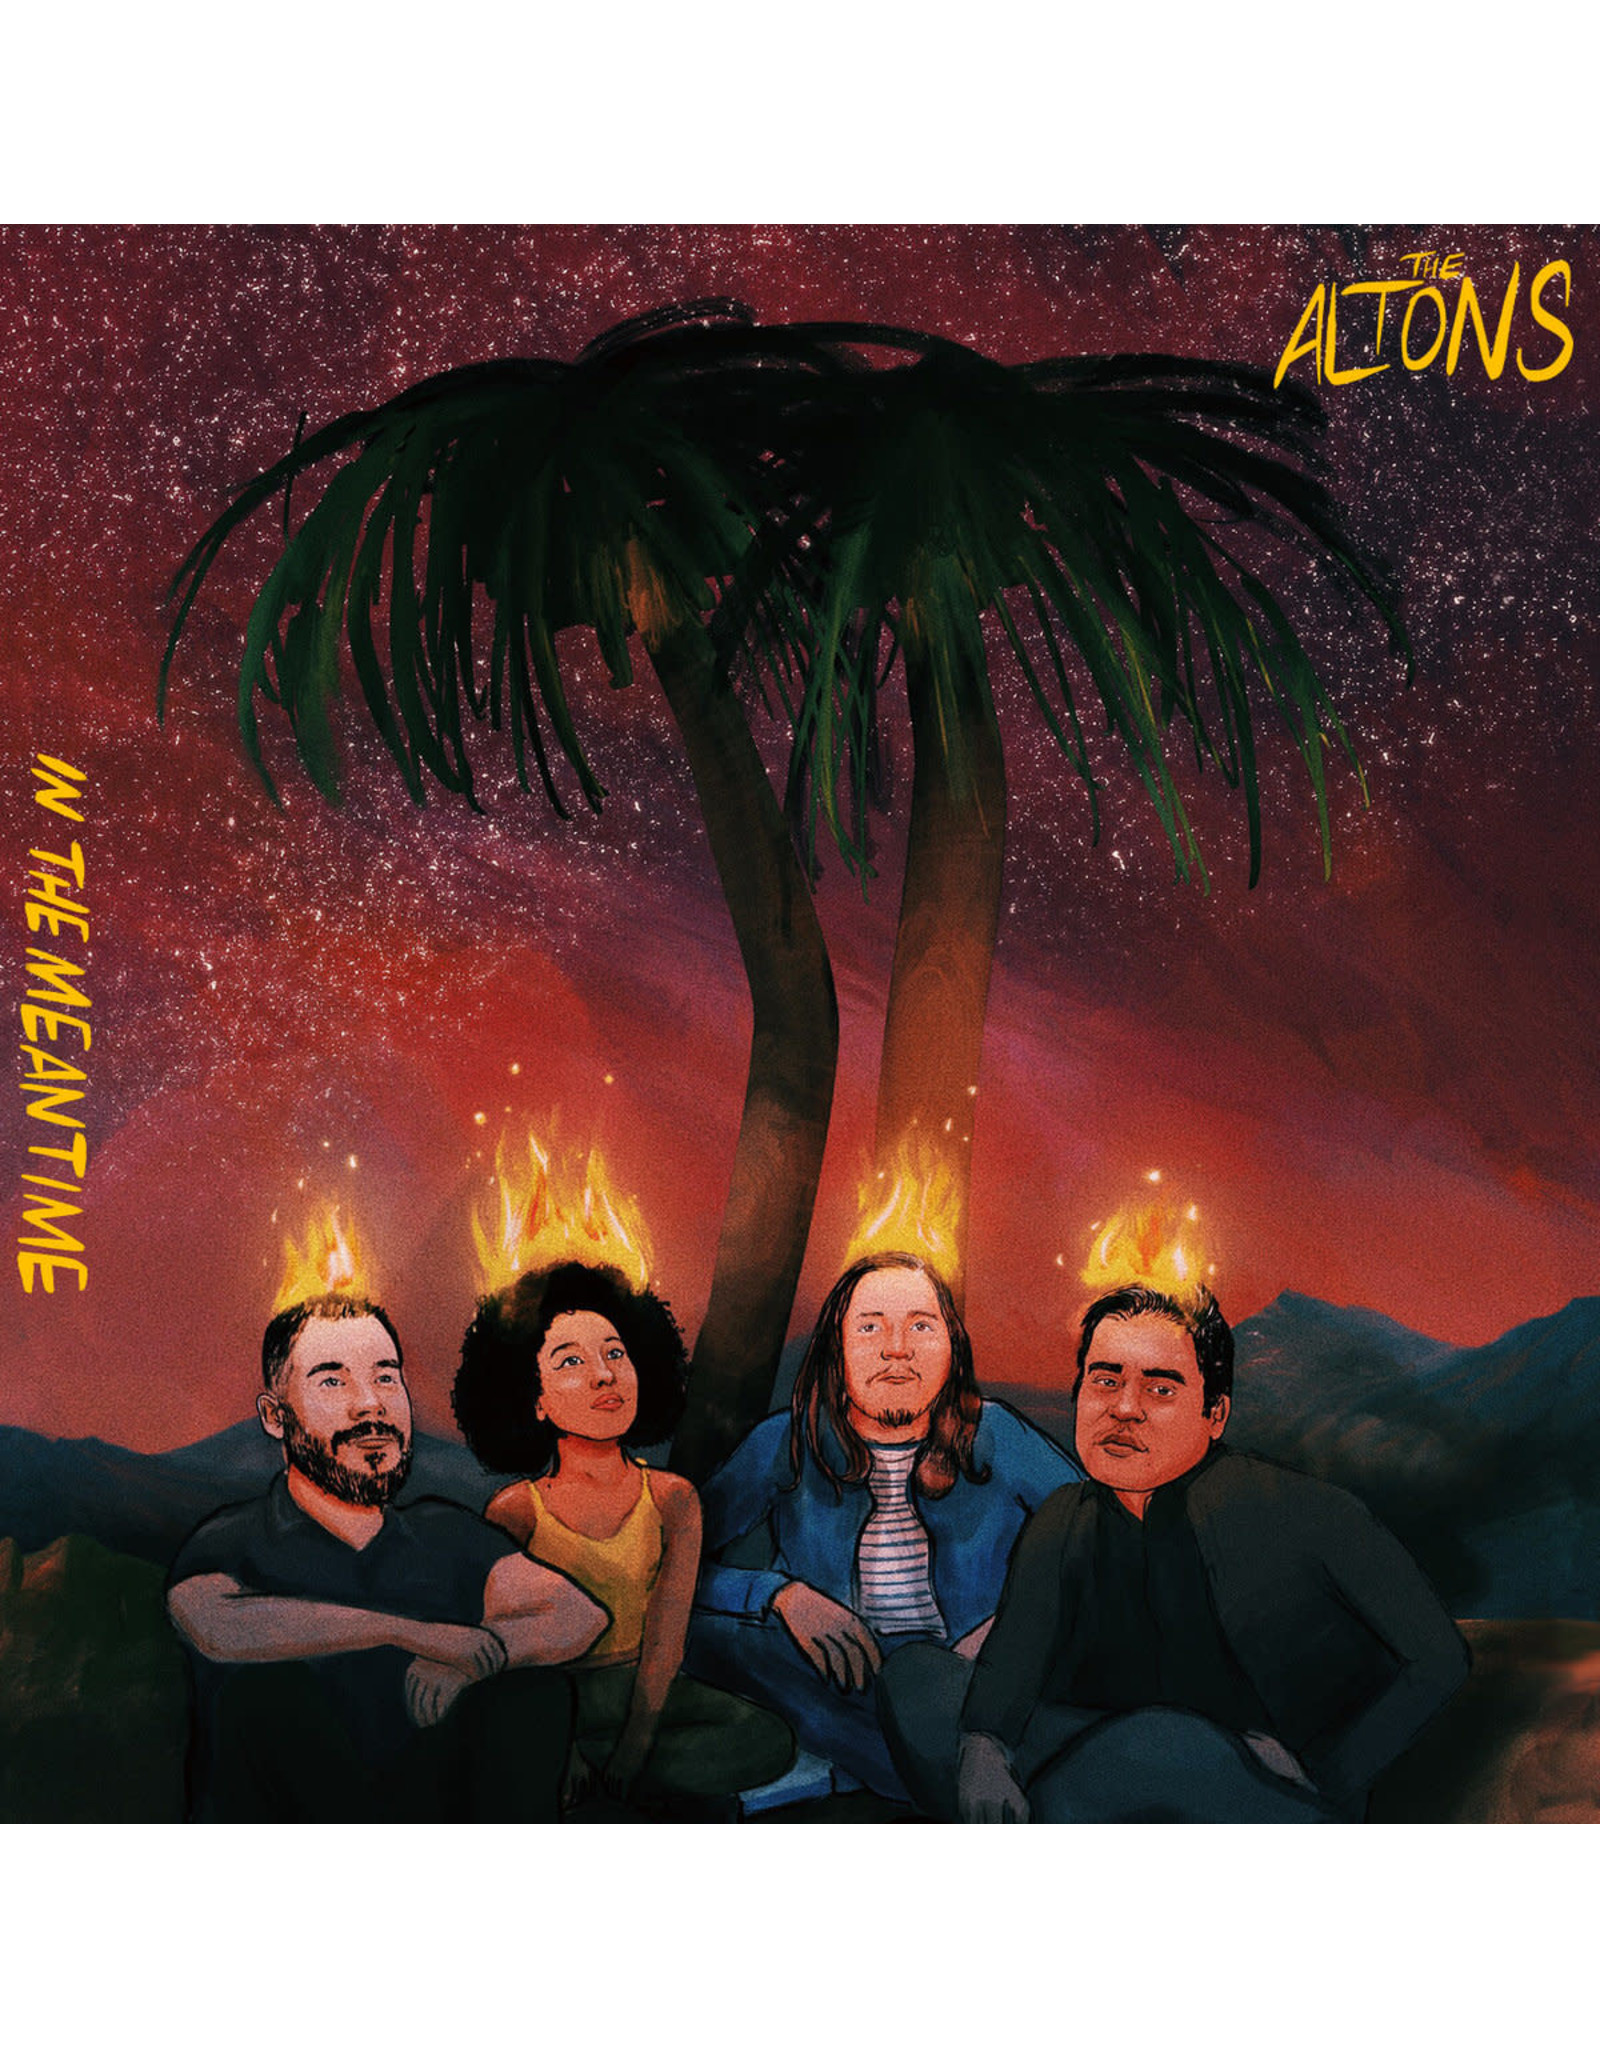 New Vinyl The Altons - In The Meantime LP